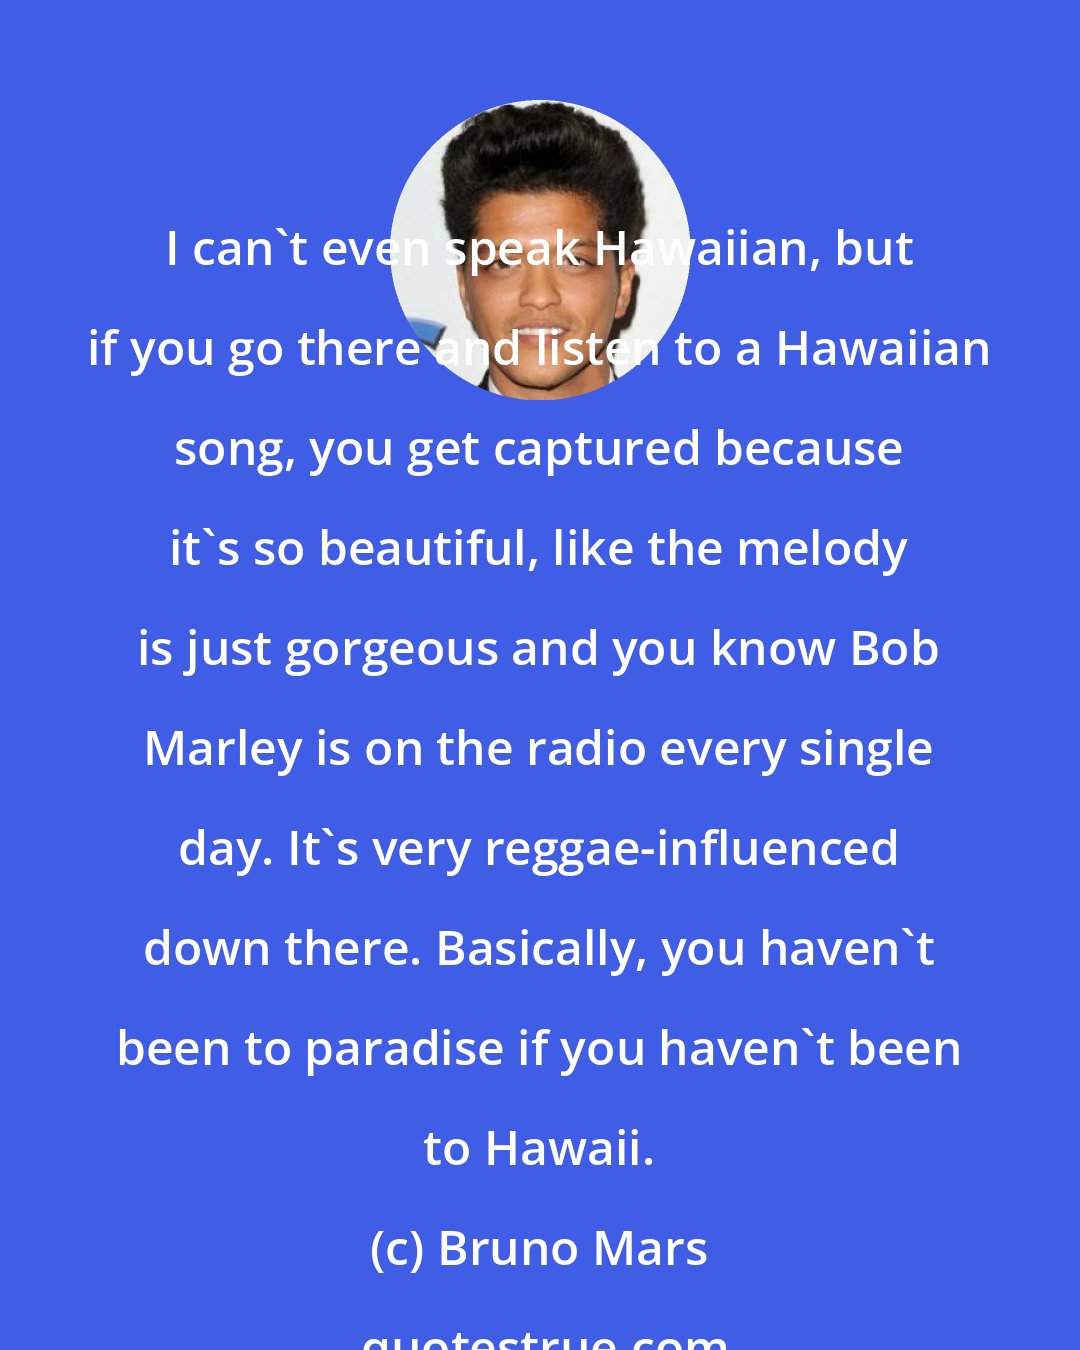 Bruno Mars: I can't even speak Hawaiian, but if you go there and listen to a Hawaiian song, you get captured because it's so beautiful, like the melody is just gorgeous and you know Bob Marley is on the radio every single day. It's very reggae-influenced down there. Basically, you haven't been to paradise if you haven't been to Hawaii.